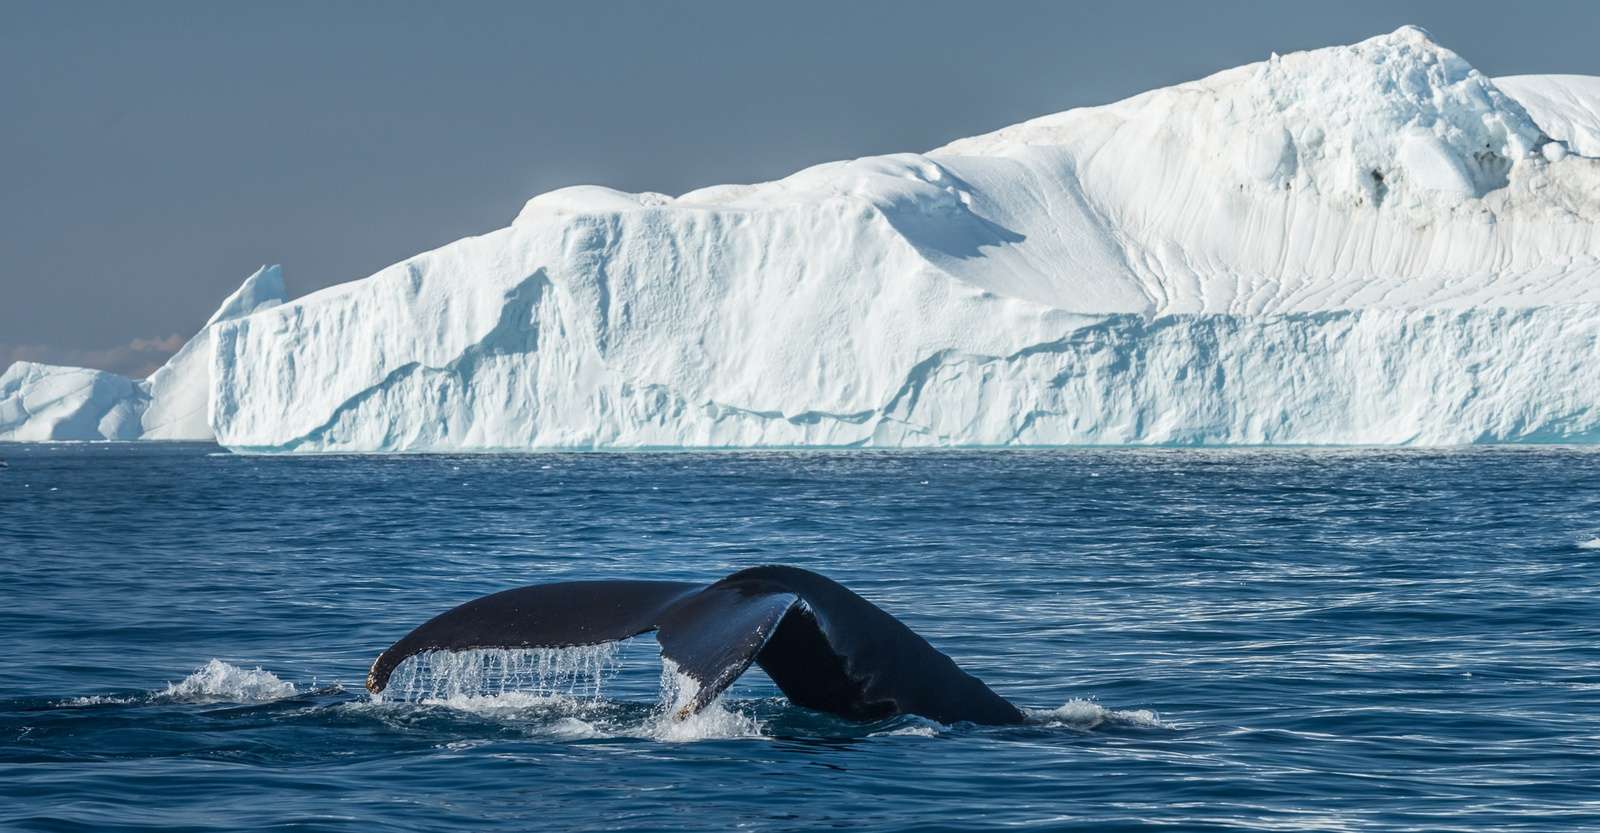 Whale tail and icebergs, Sermilik Fjord, Greenland.